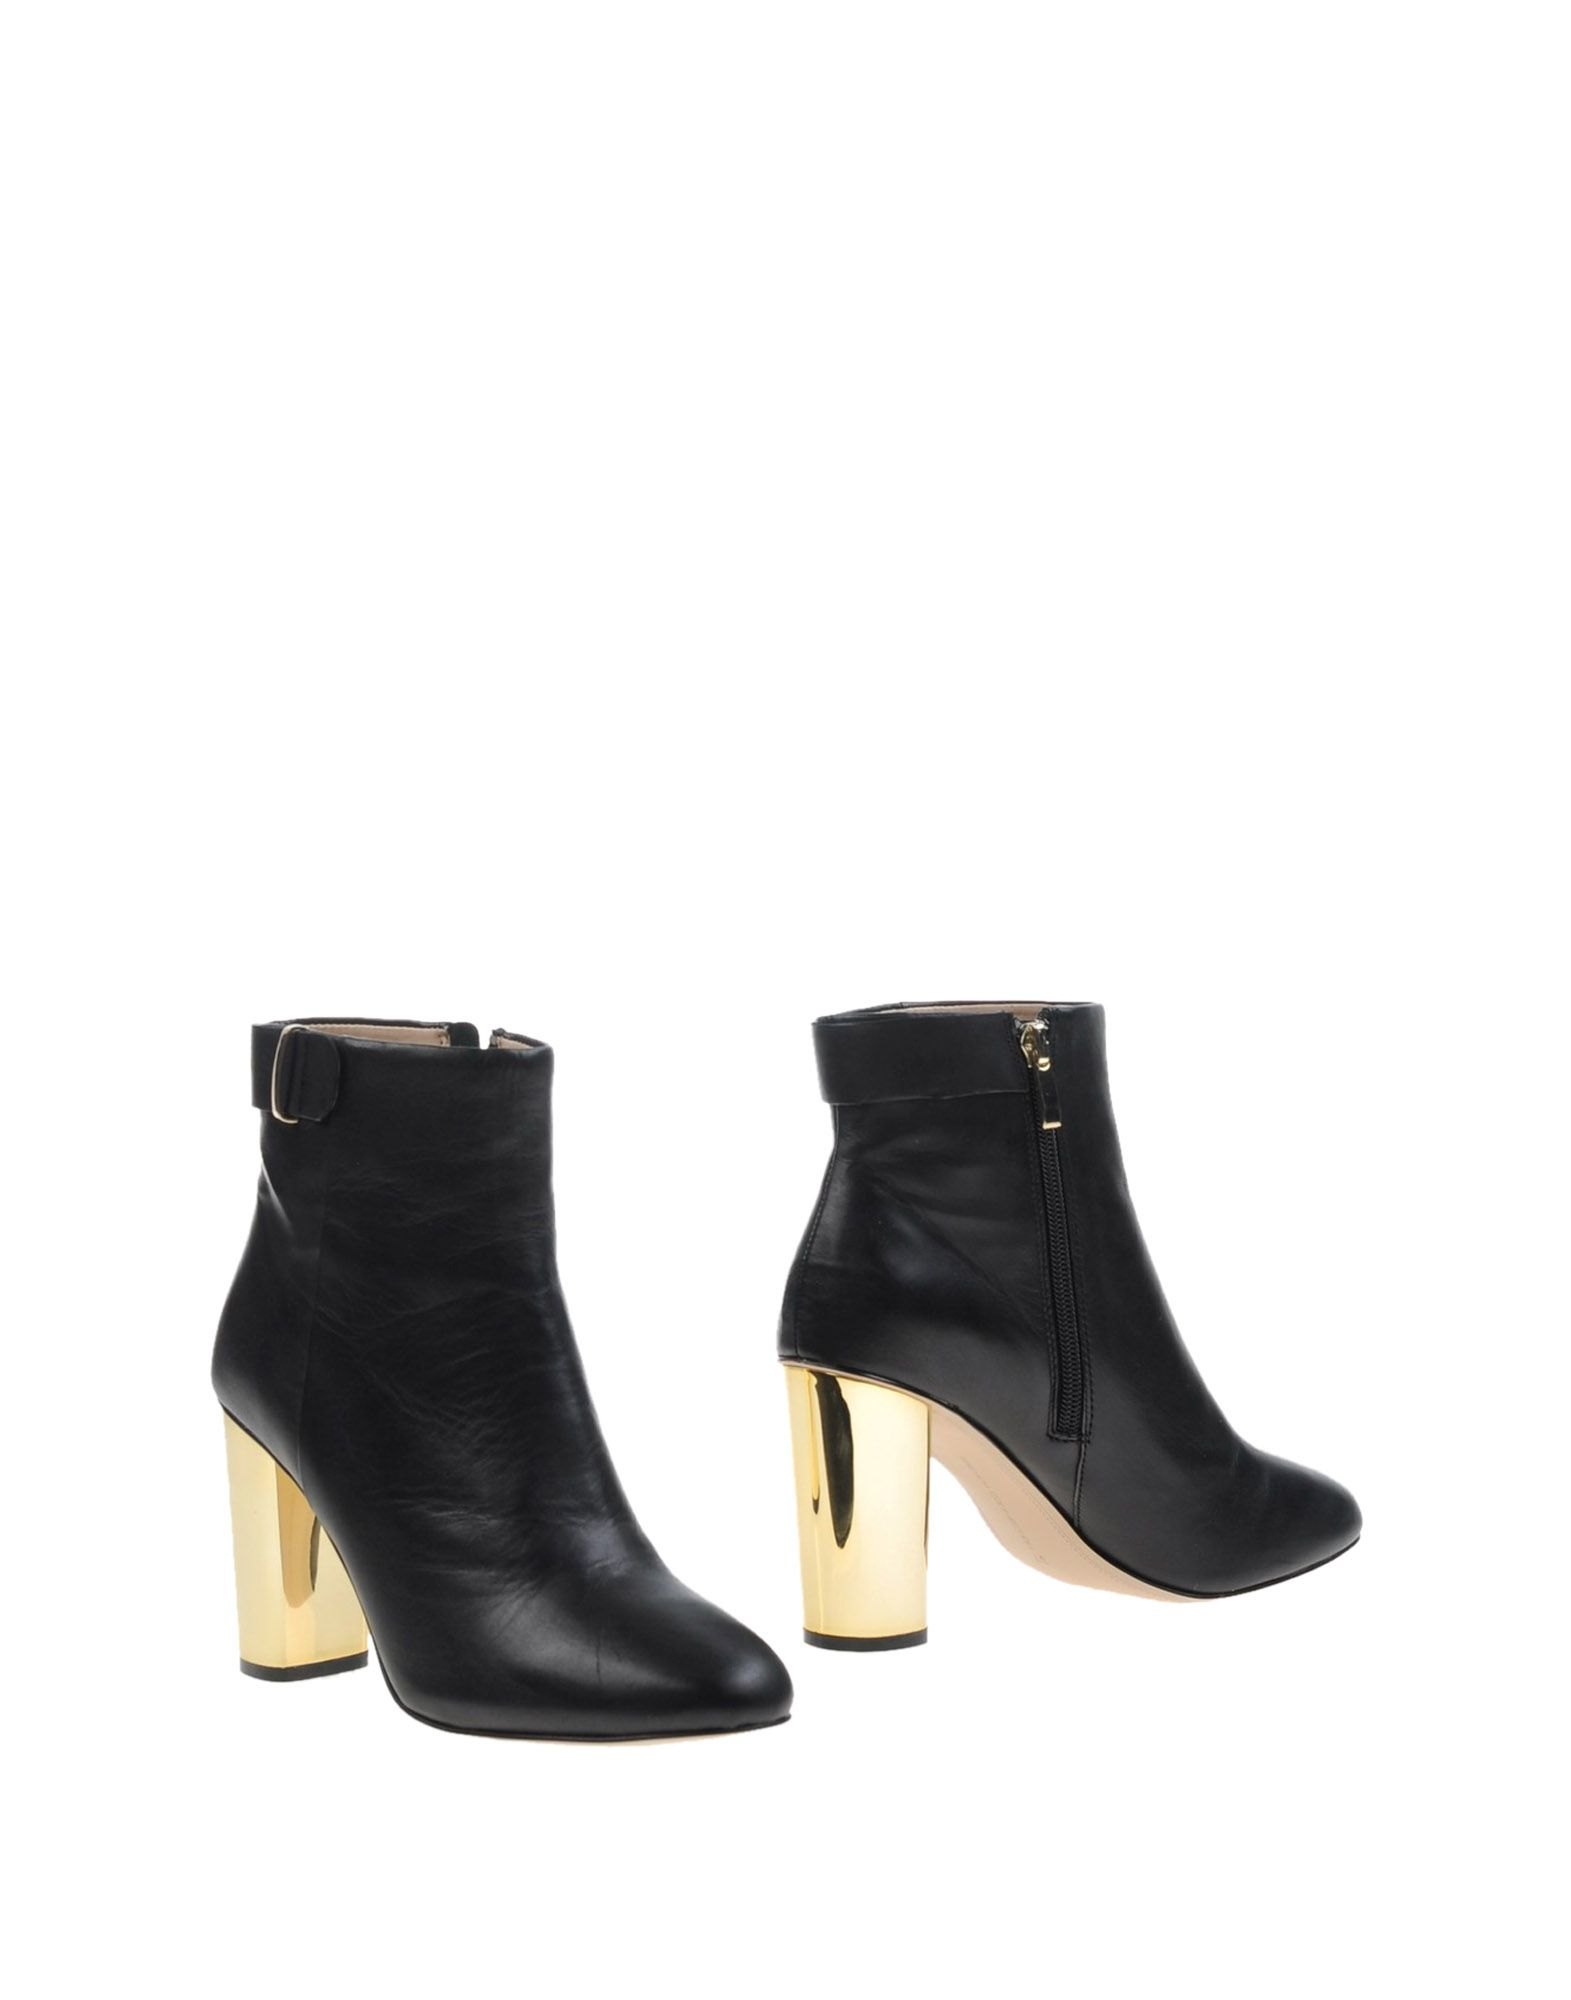 Lyst - French connection Geometric-Heeled Leather Ankle Boots in Black